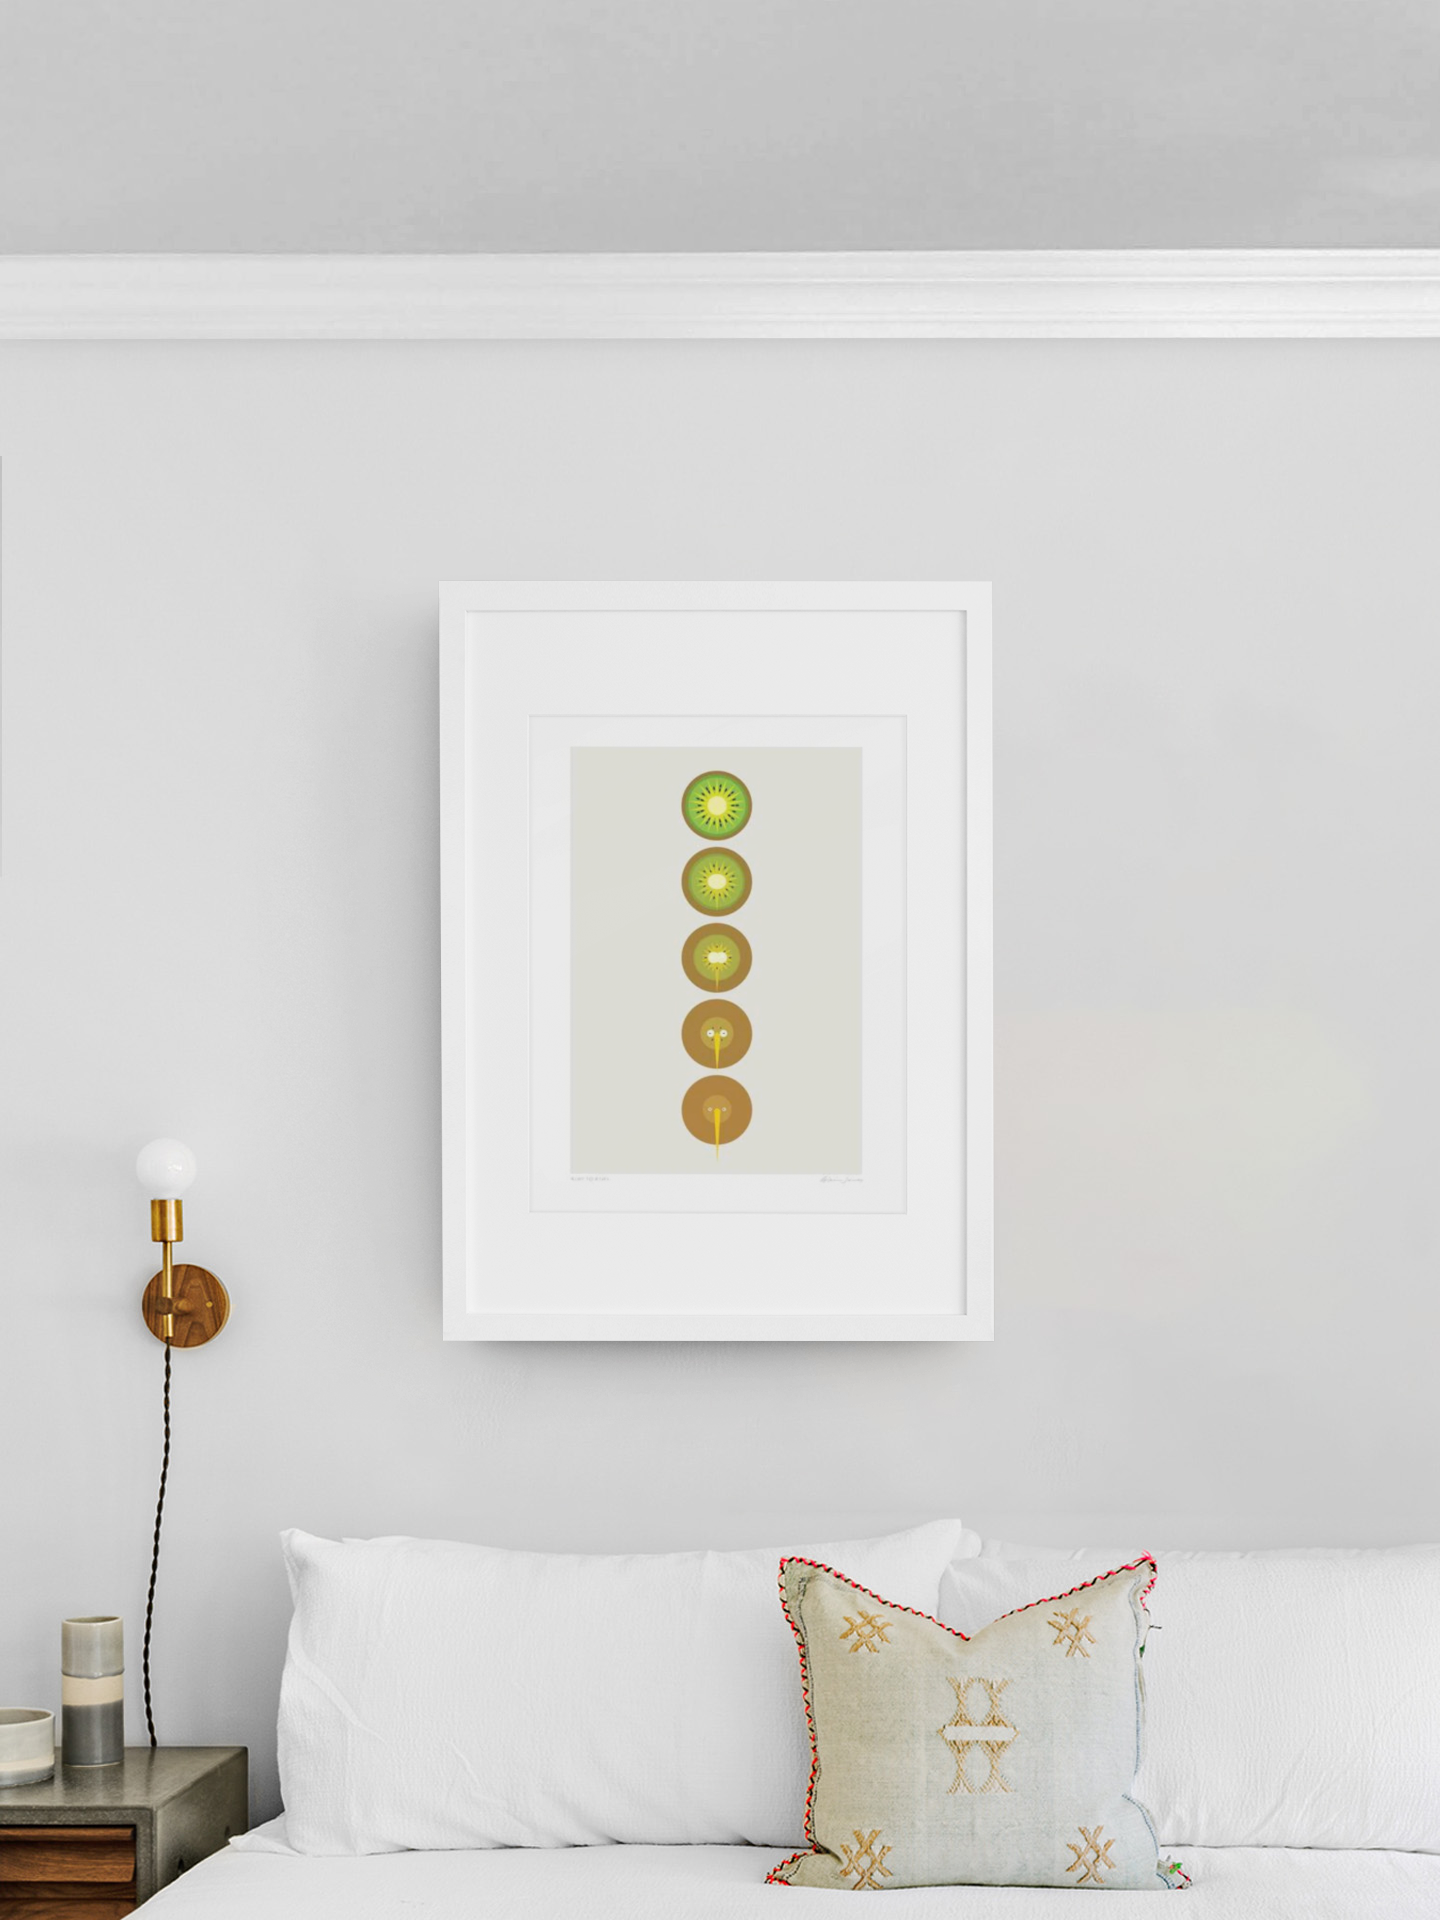 A serene living space featuring a neatly organized vertical arrangement of seven Kiwi to Kiwi slices in a frame, adding a vibrant yet simplistic touch to the minimalist decor by Glenn Jones.